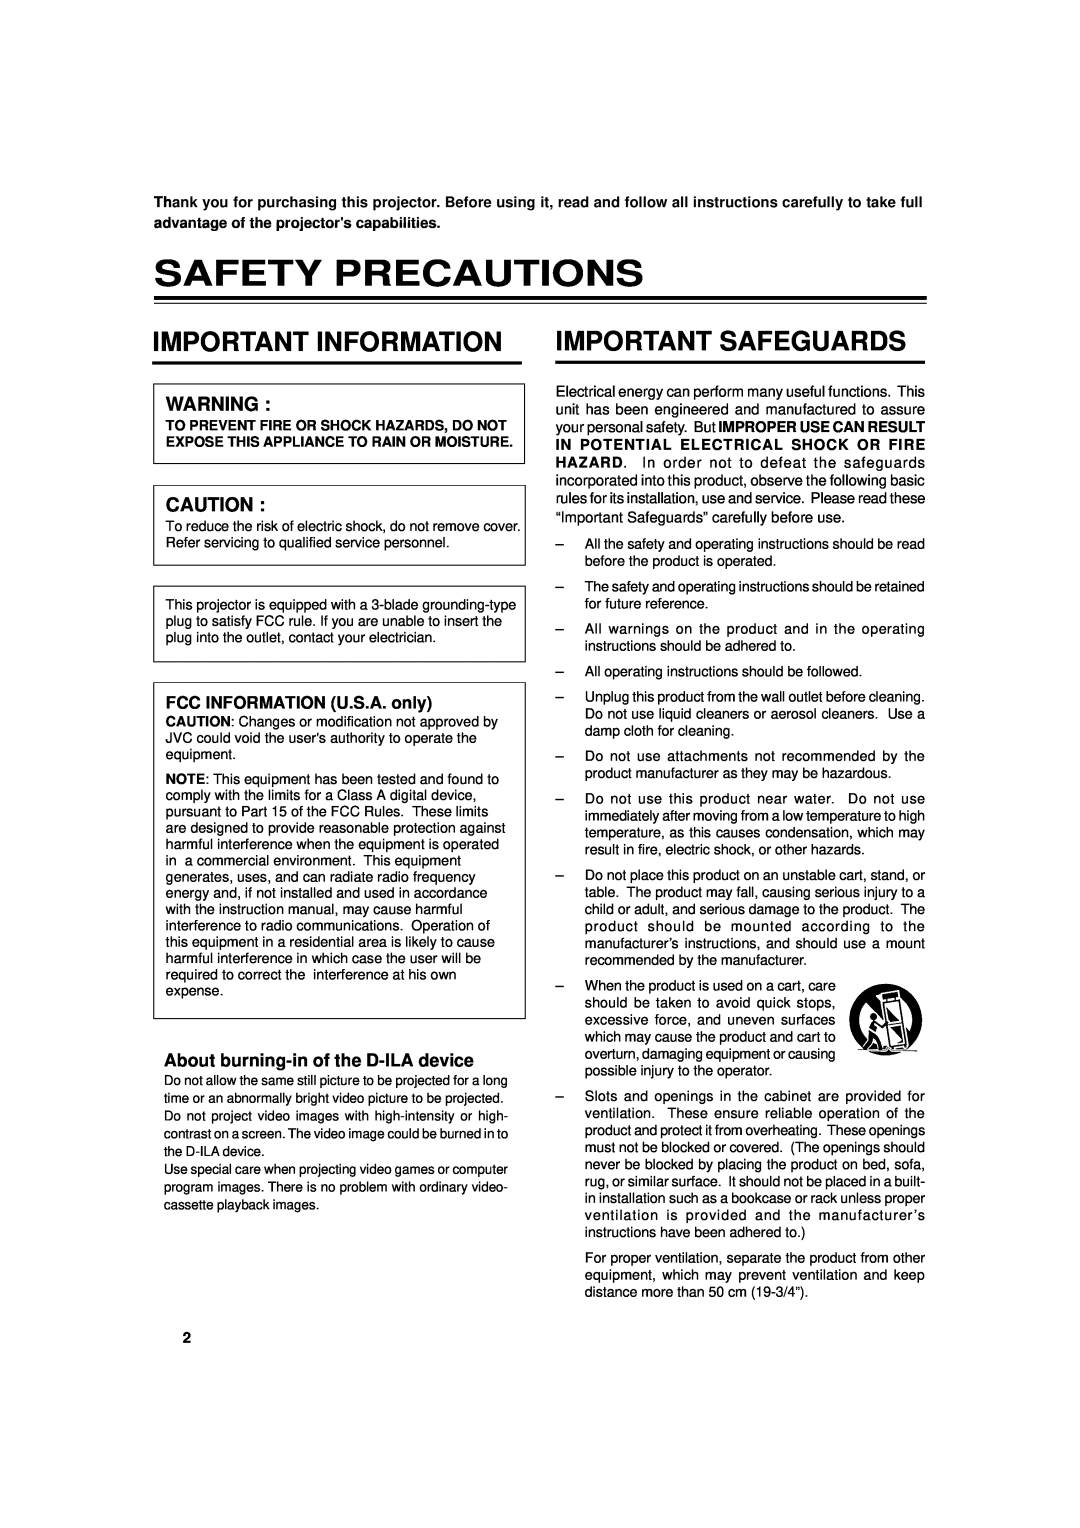 JVC DLA-G15U manual Safety Precautions, Important Information Important Safeguards, About burning-in of the D-ILA device 